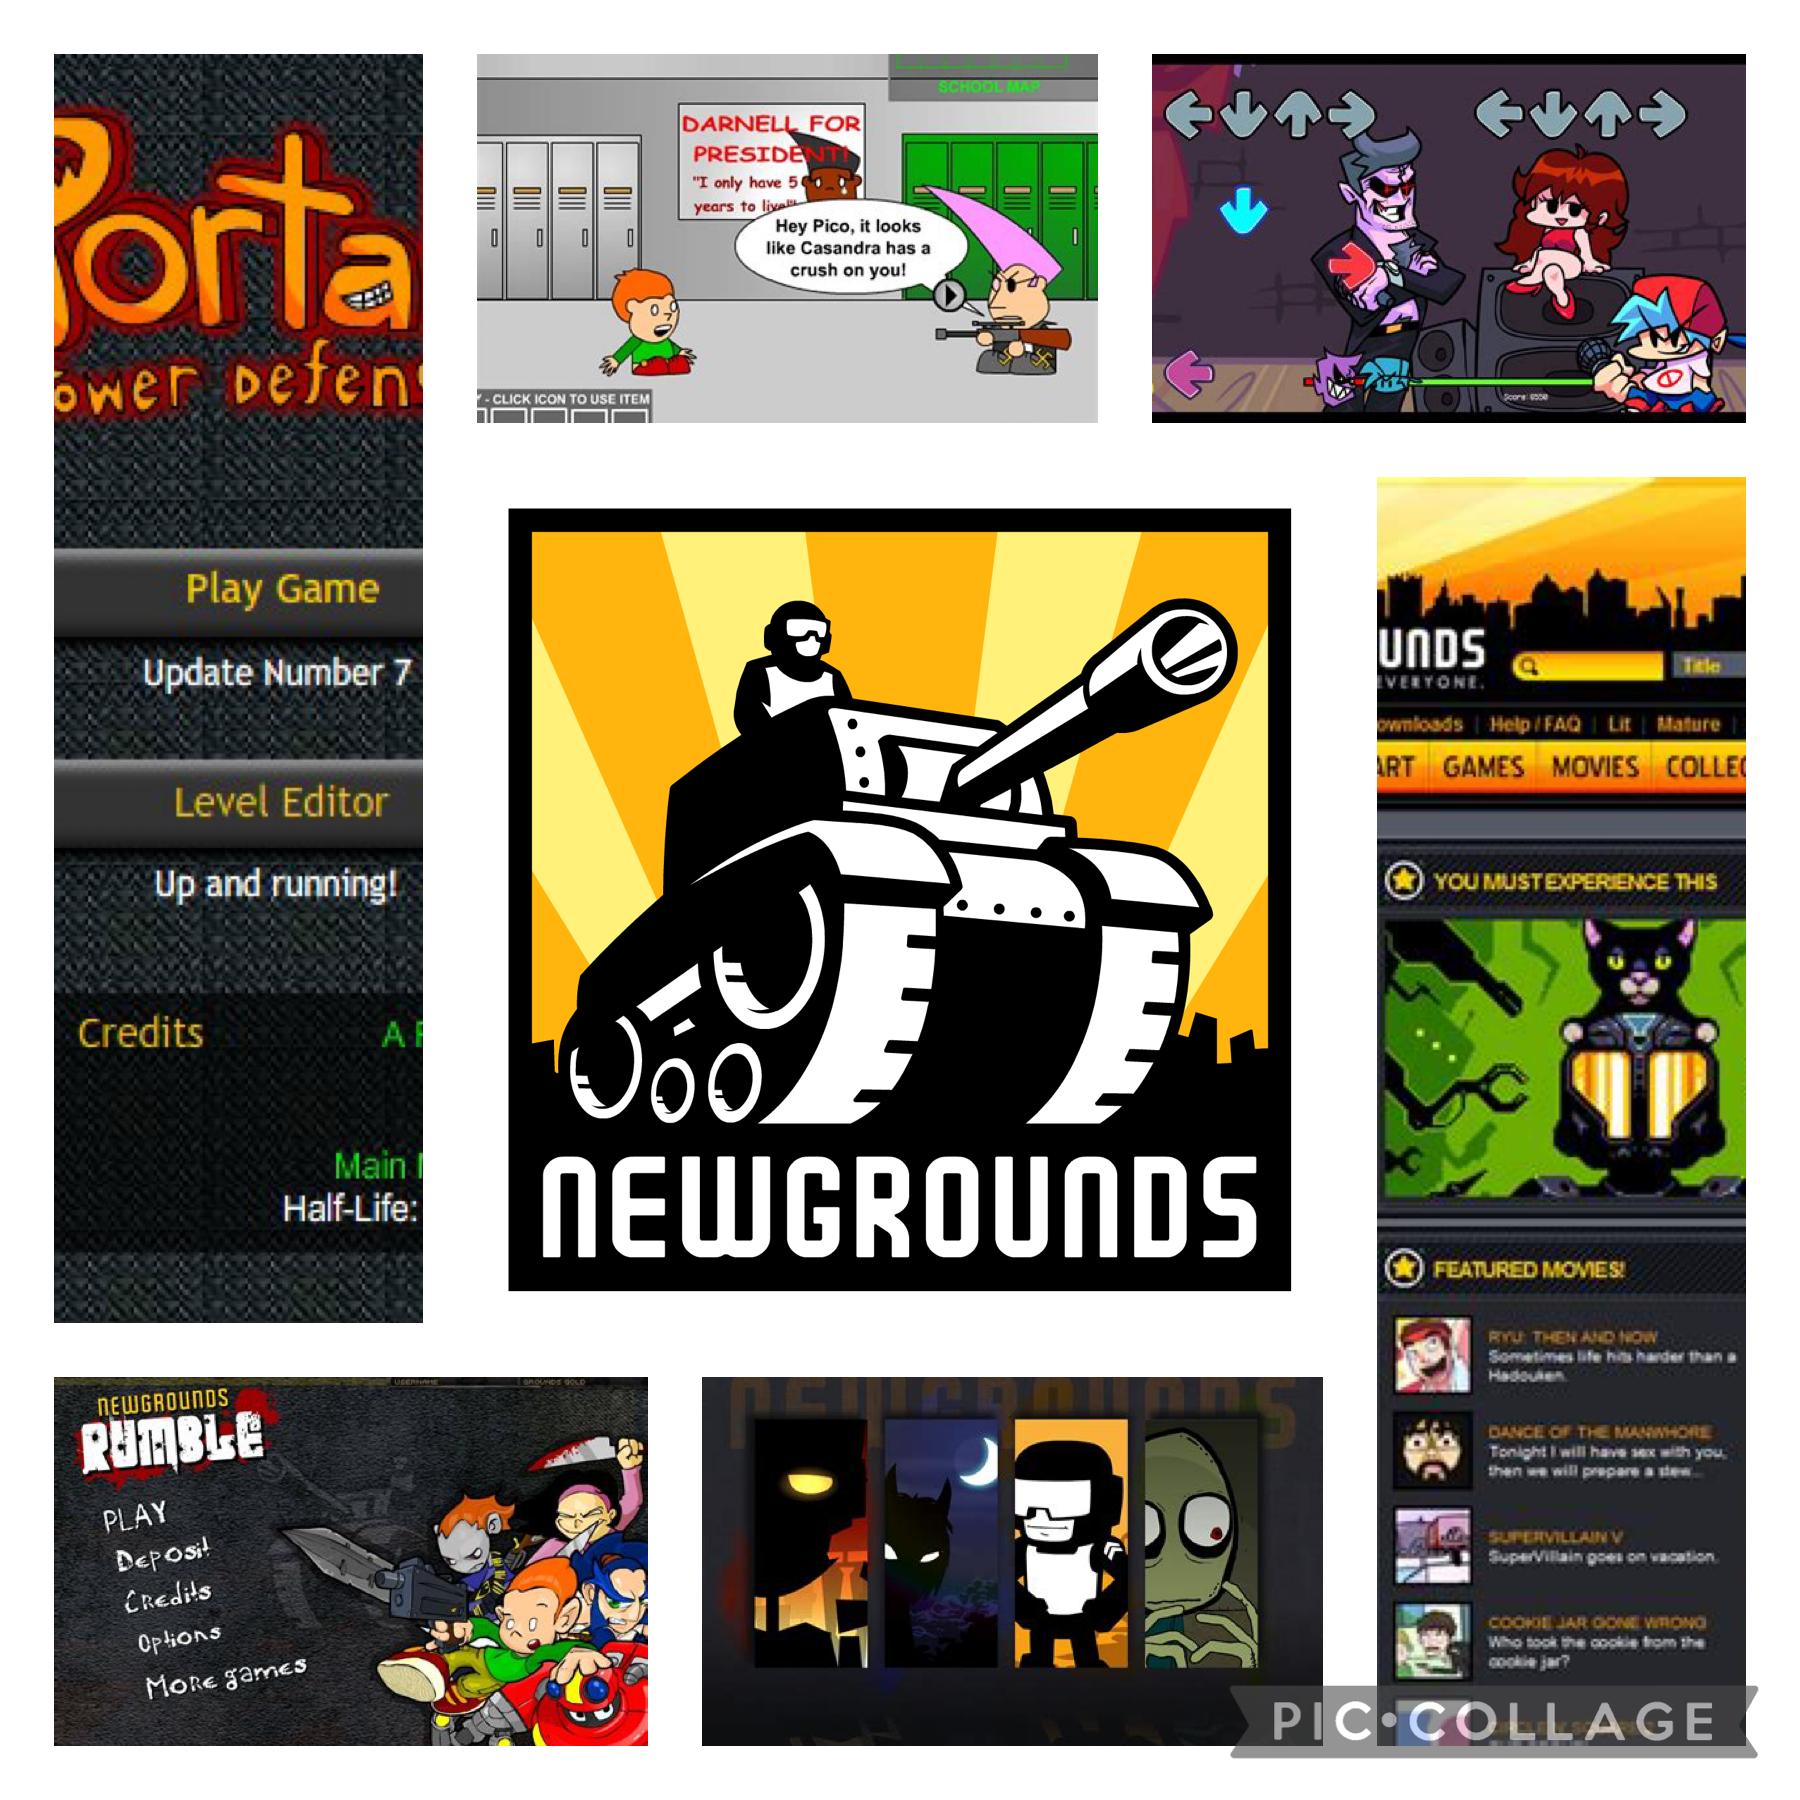 Some of our Newgrounds games: